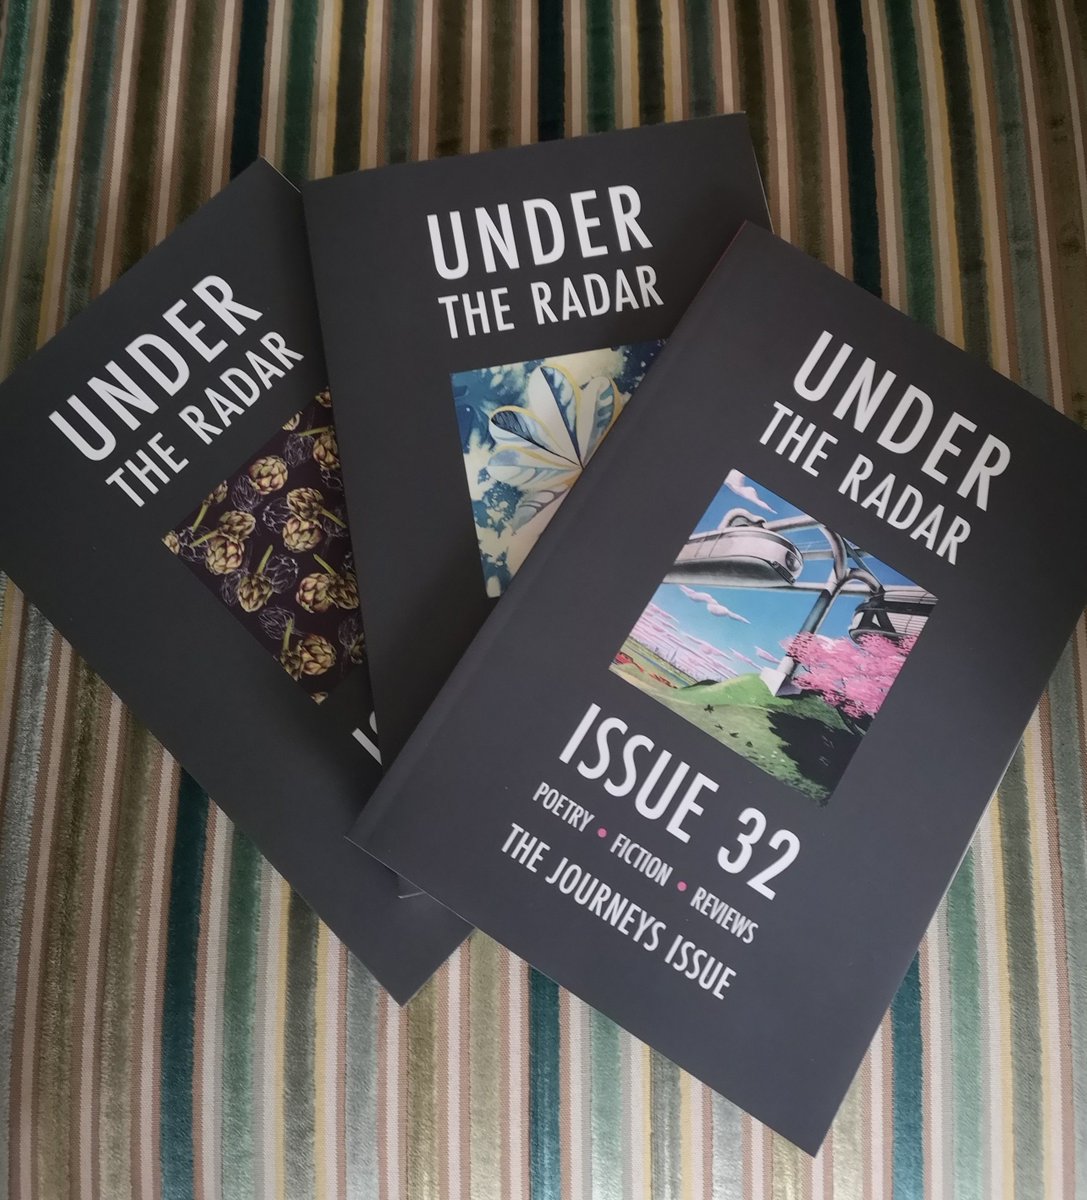 Our excellent Under the Radar flagship magazine offer is closing soon. Half price copies including the most recent Issue are now at our online shop. Any missing from your shelves? Pick them up at 50% off buff.ly/40A1vYR